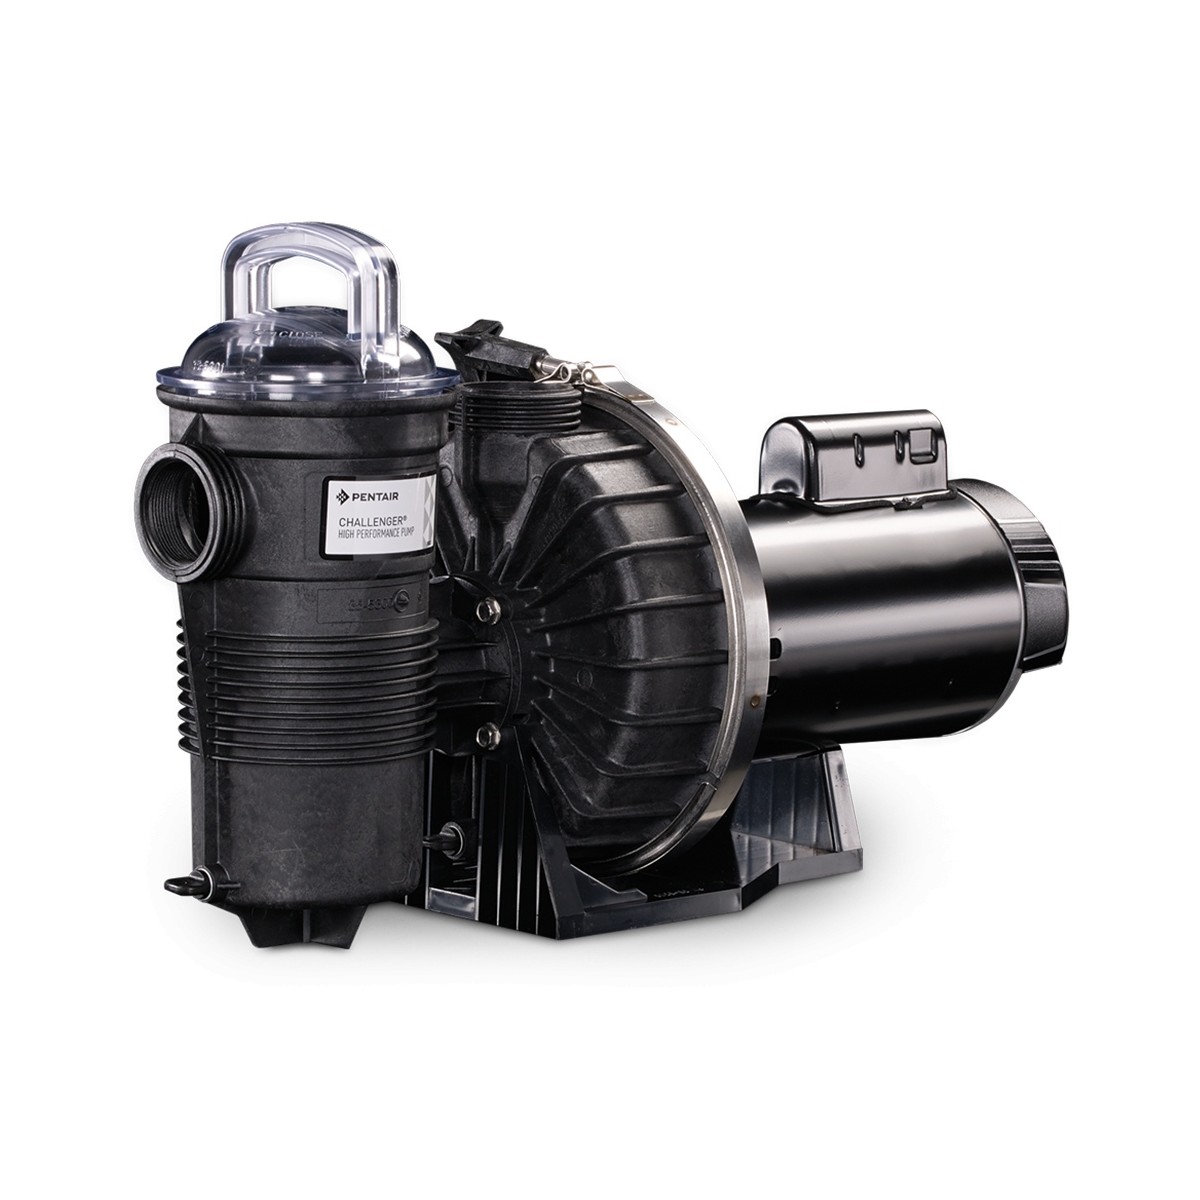 Pompa piscina Pentair CHALLENGER 2,20 KW/3 HP trifase